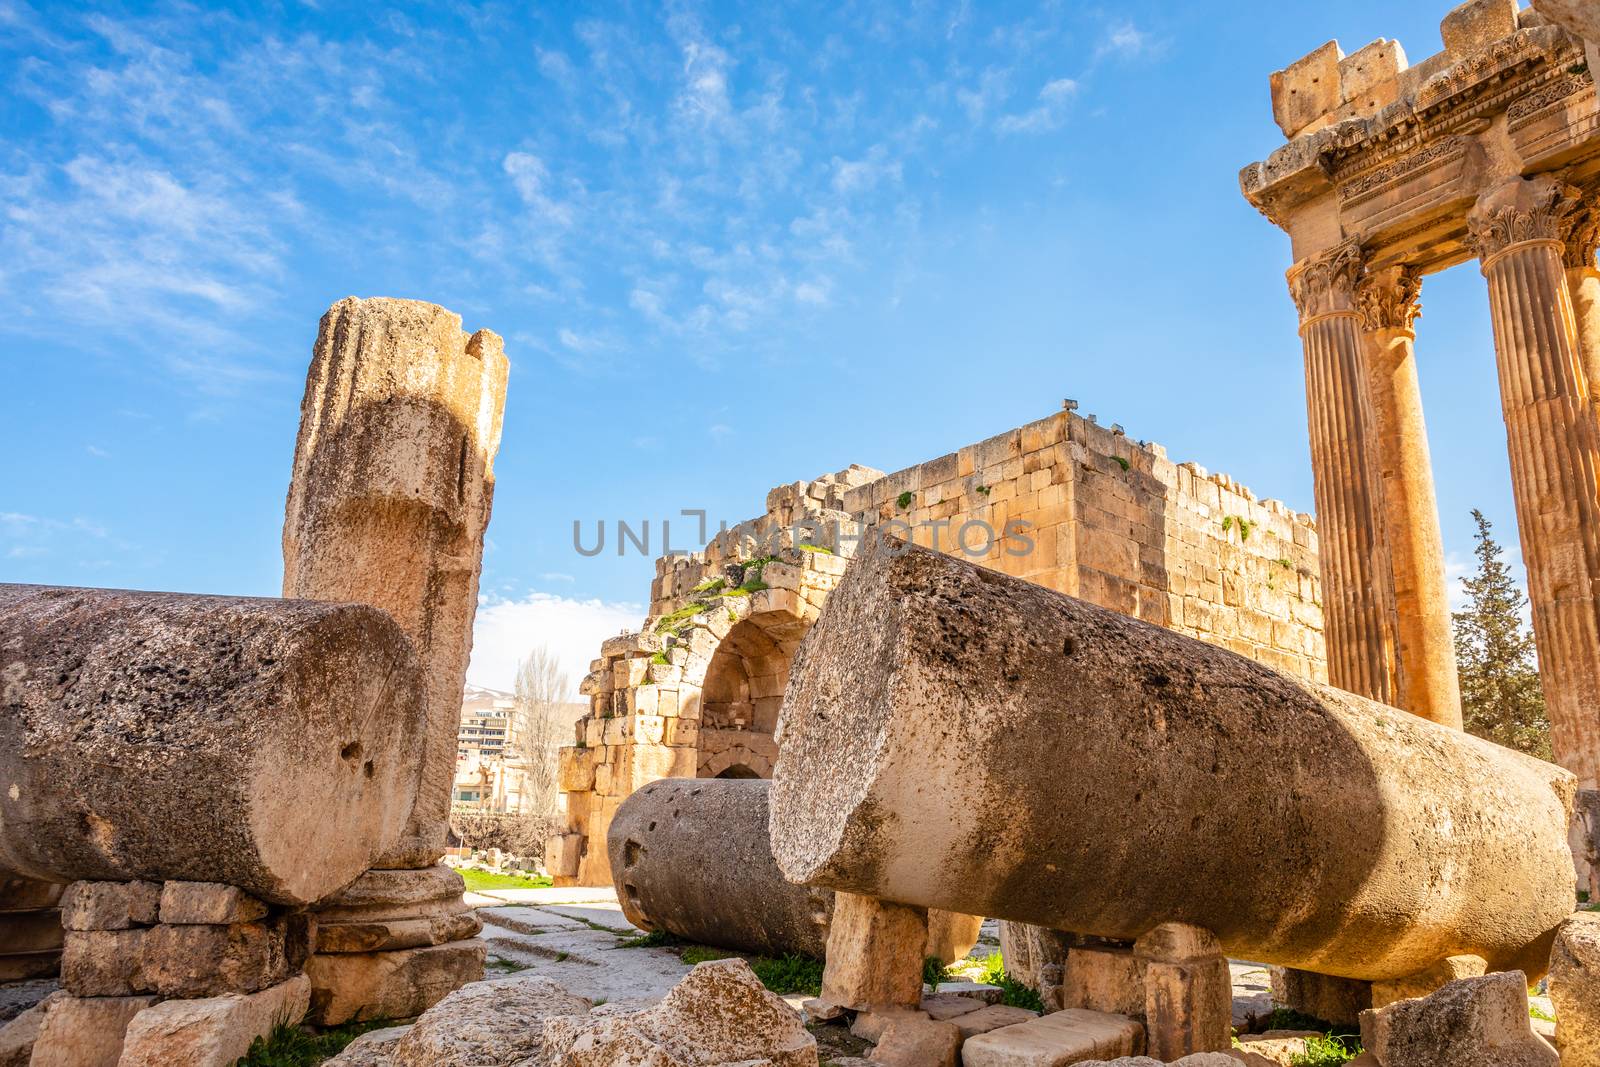 Ancient ruins of Jupiter temple with blue sky in the background, by ambeon